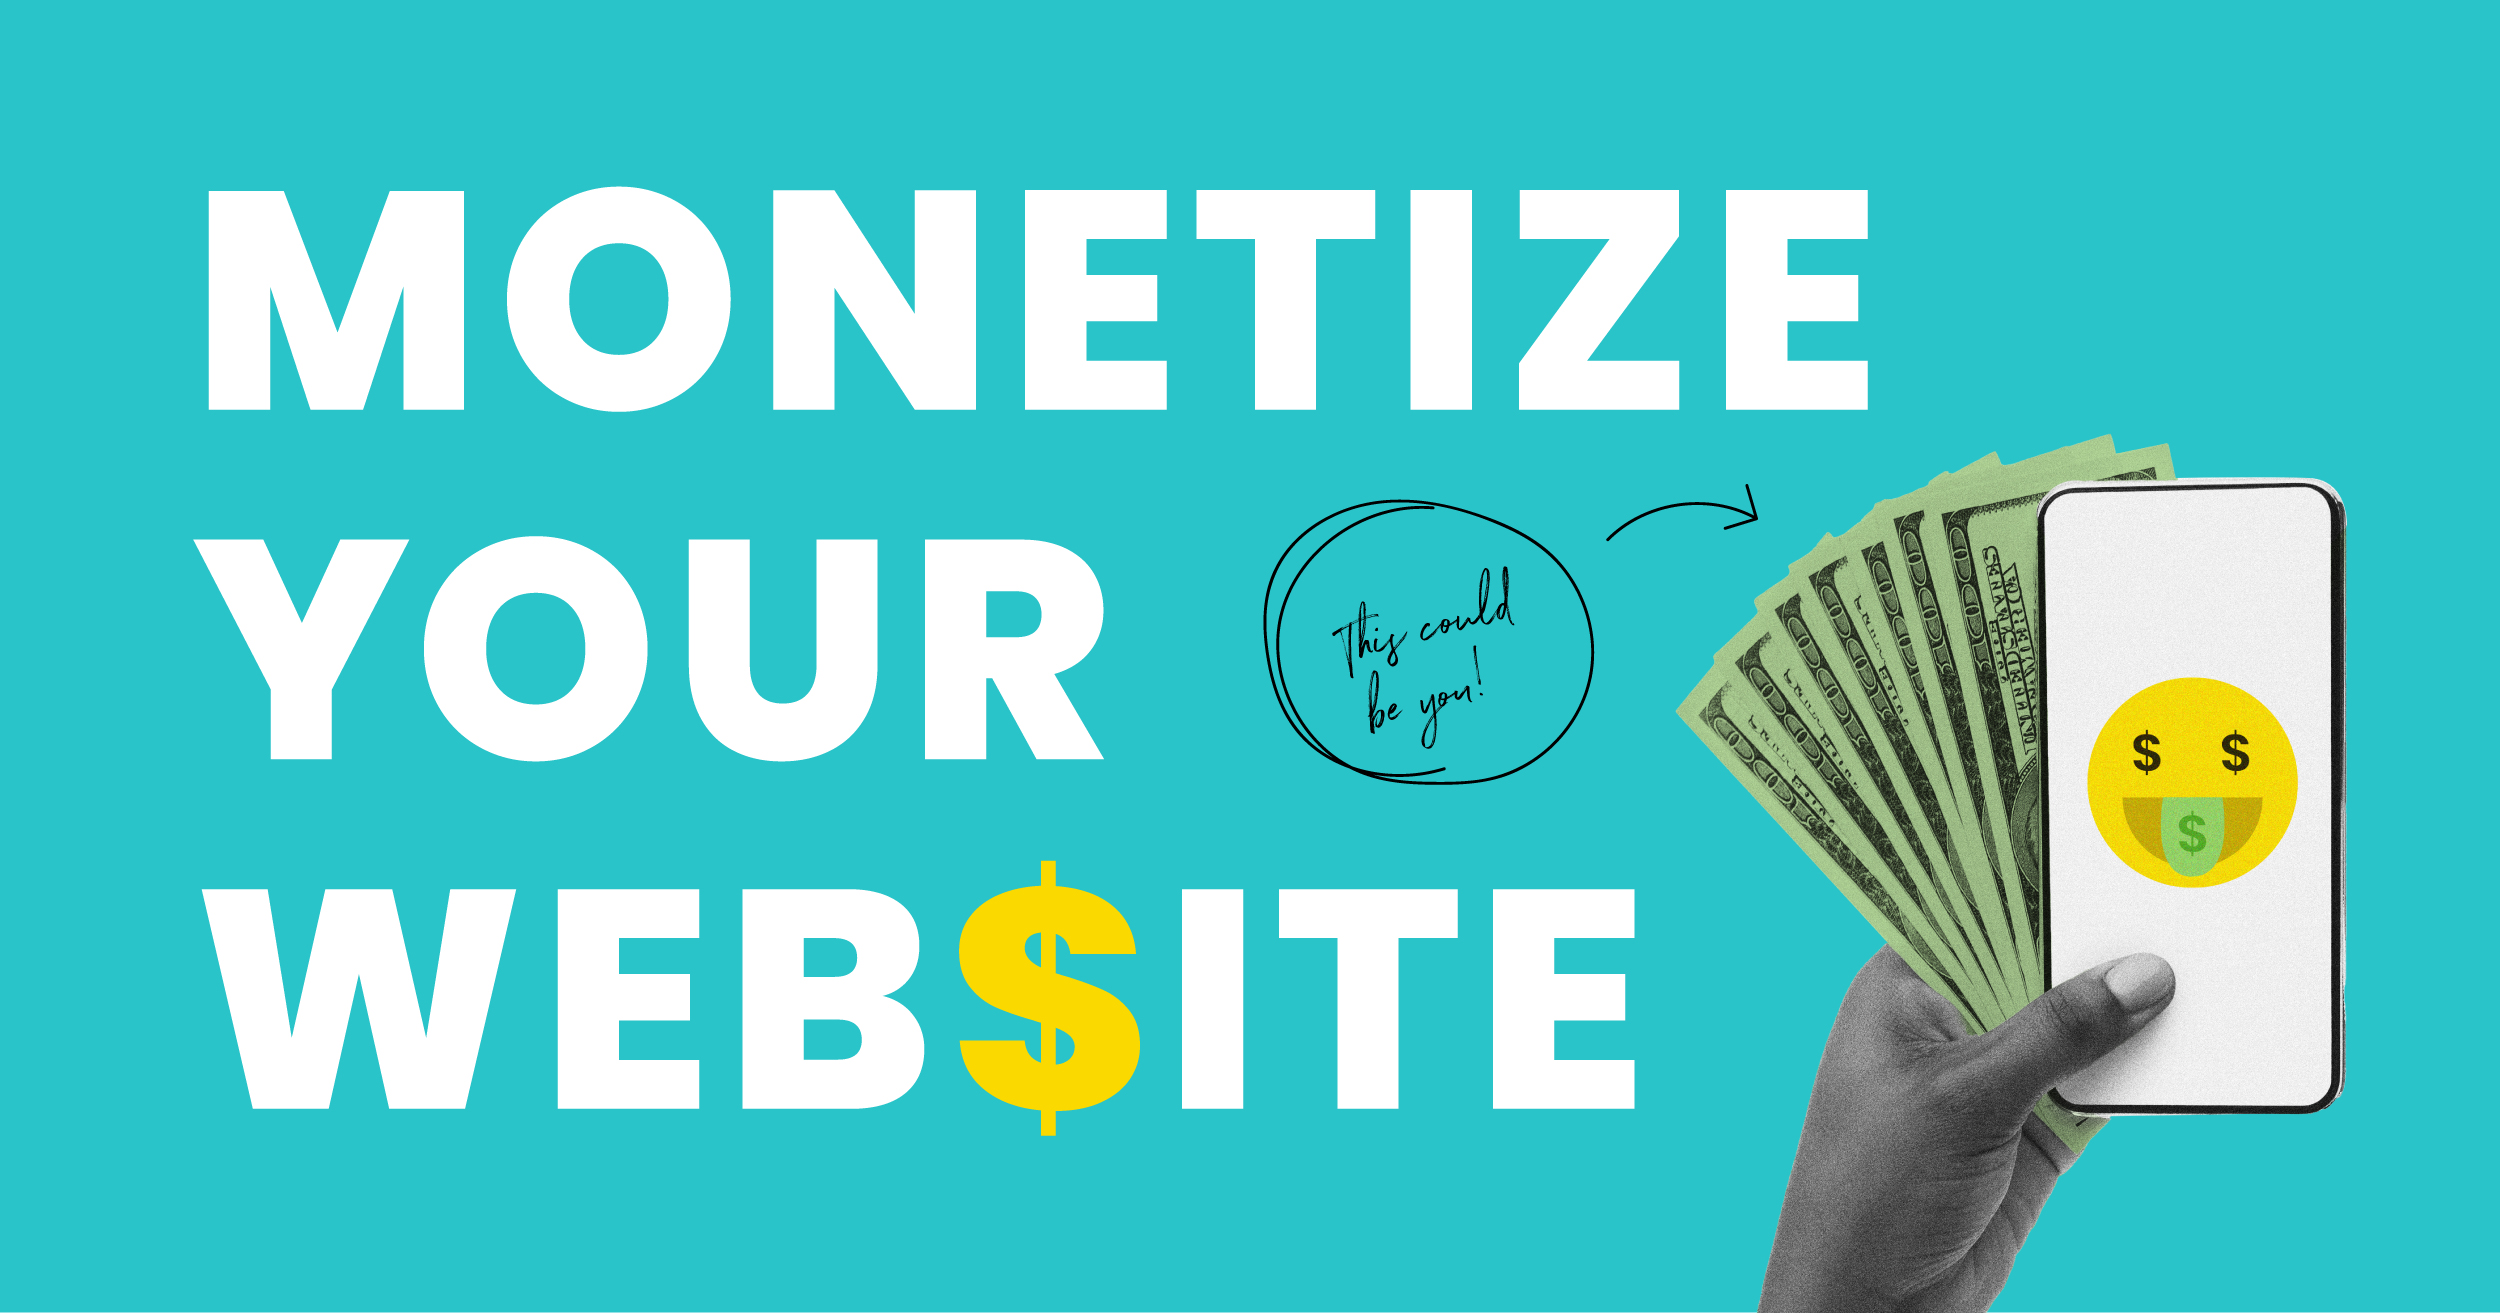 Monetize Your Website: 4 Tips to Make Your Website Work for You